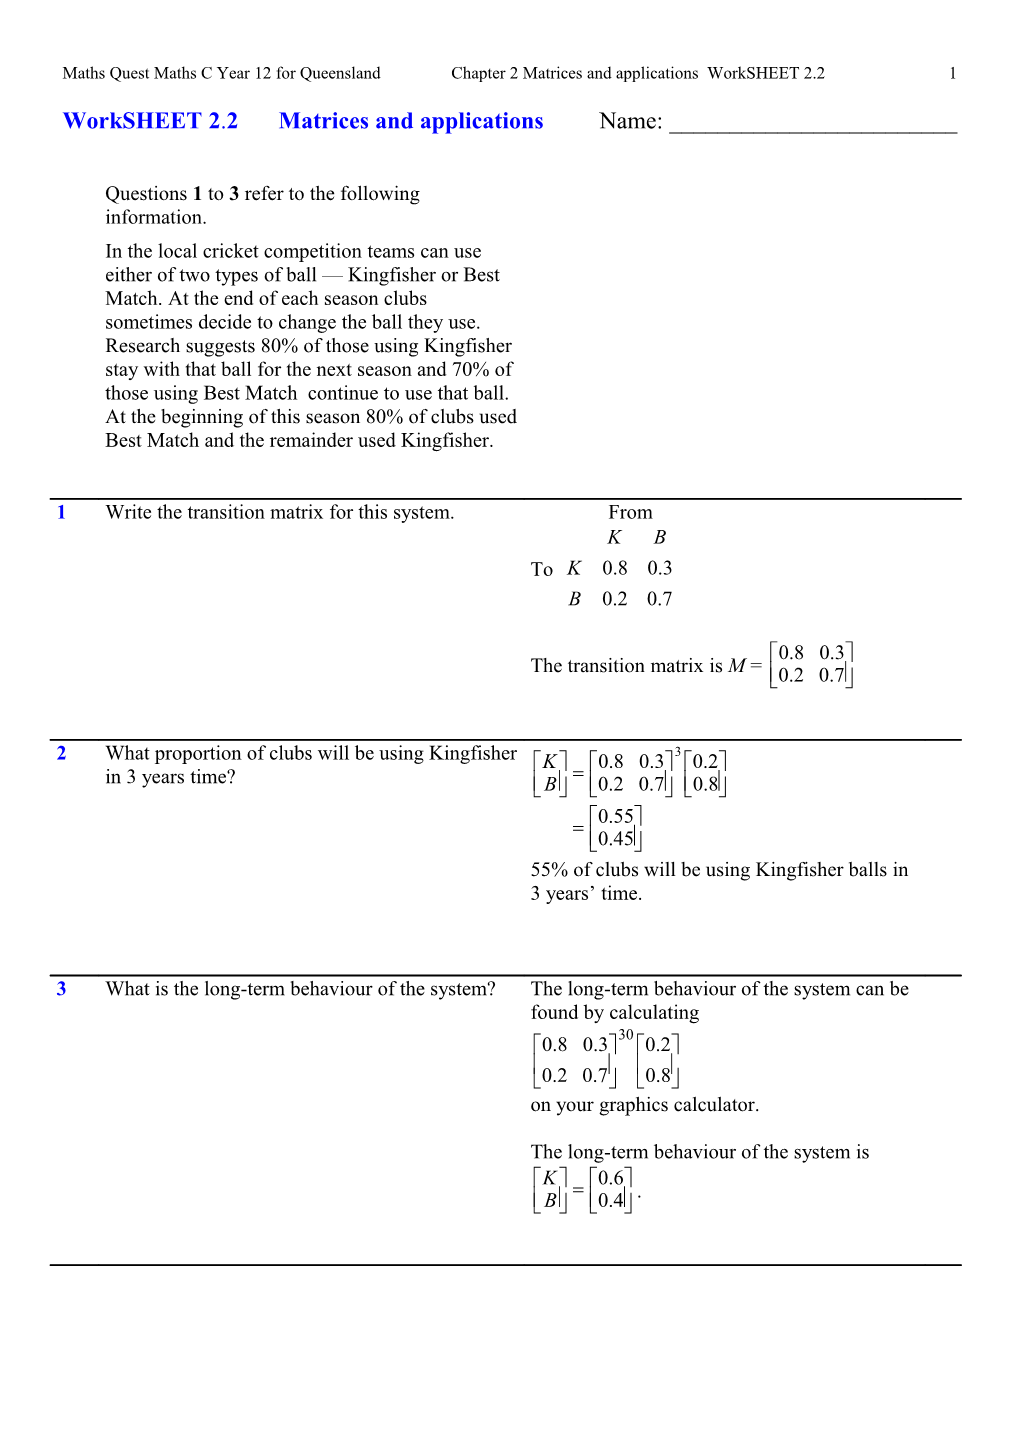 Maths Quest Maths C Year 12 for Queensland Chapter 2 Matrices and Applications Worksheet 2.2 2